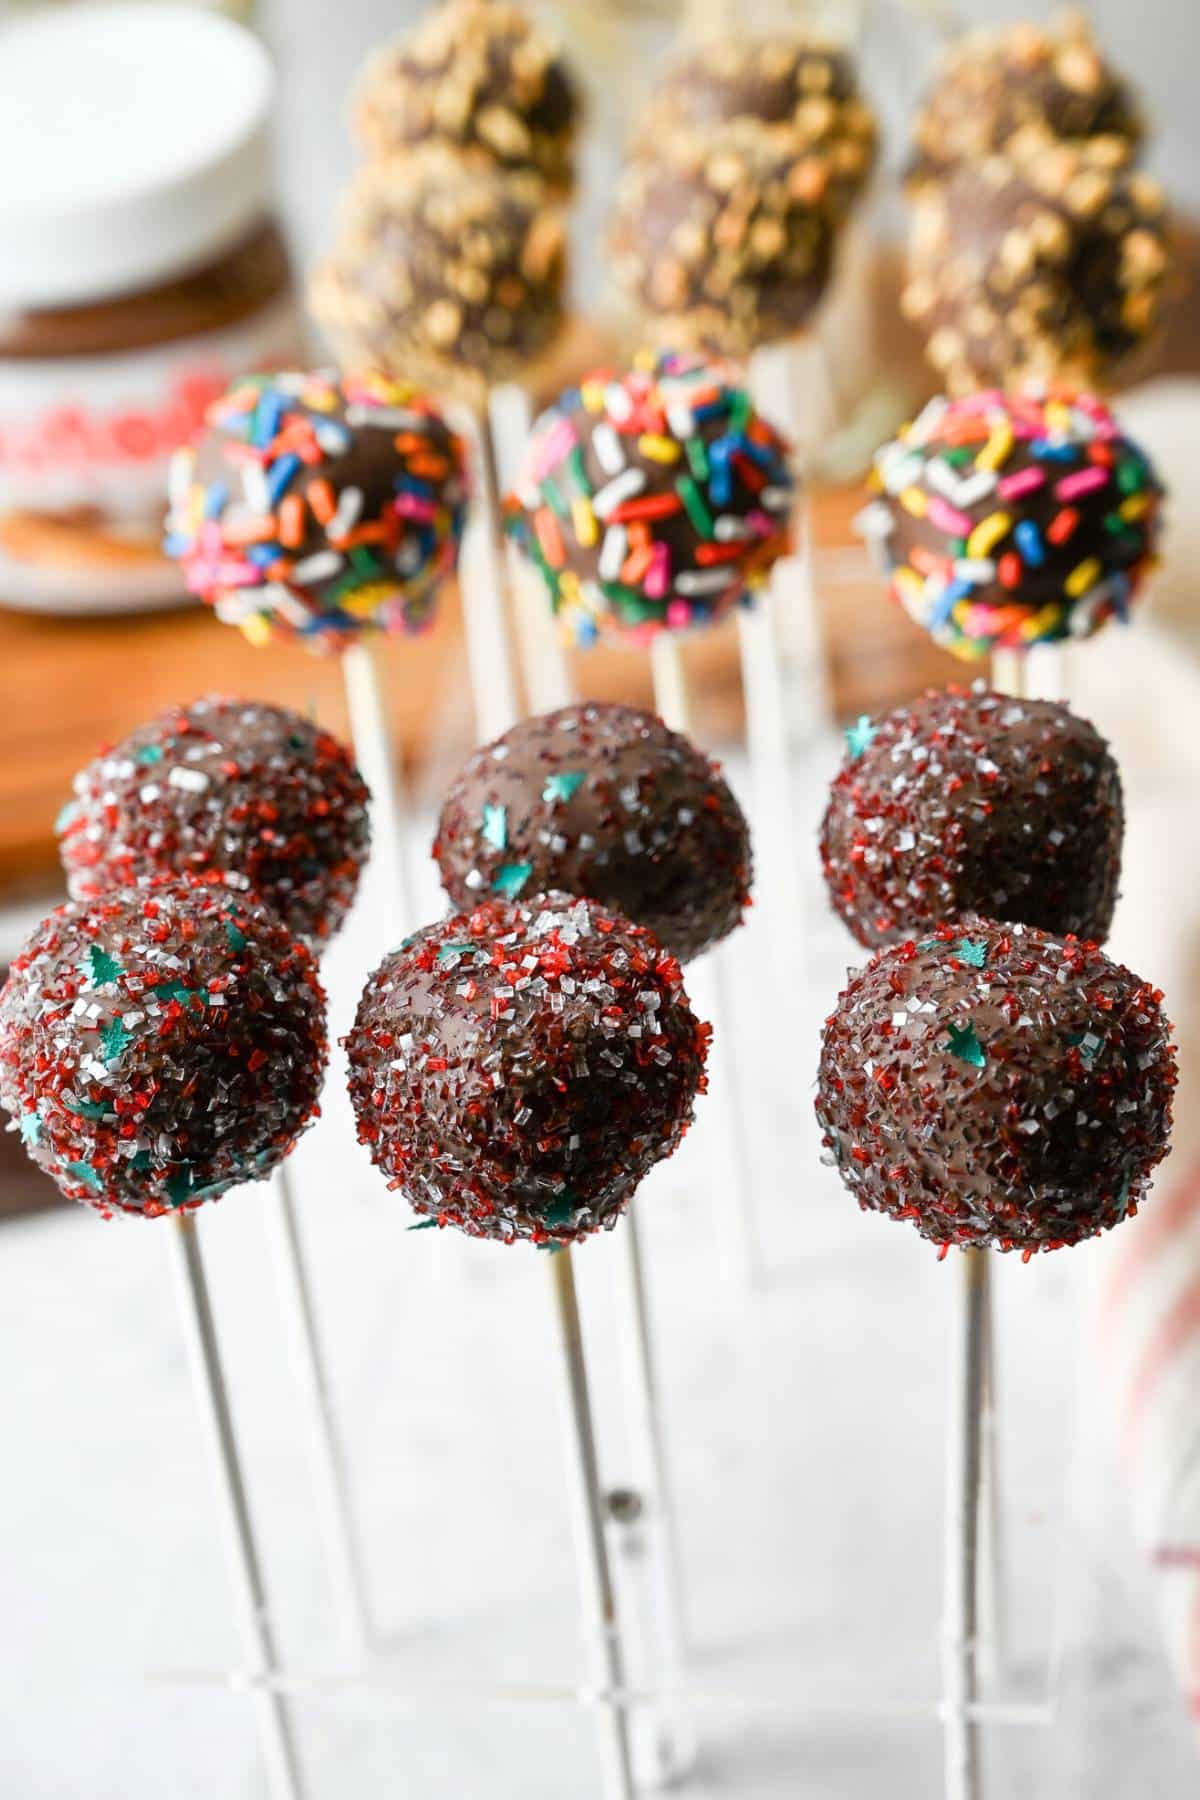 This easy Nutella Cake Pops recipe delivers an irresistible mash-up of rich chocolate cake, creamy chocolate hazelnut spread, and chopped hazelnuts on a stick! via @Ameessavorydish